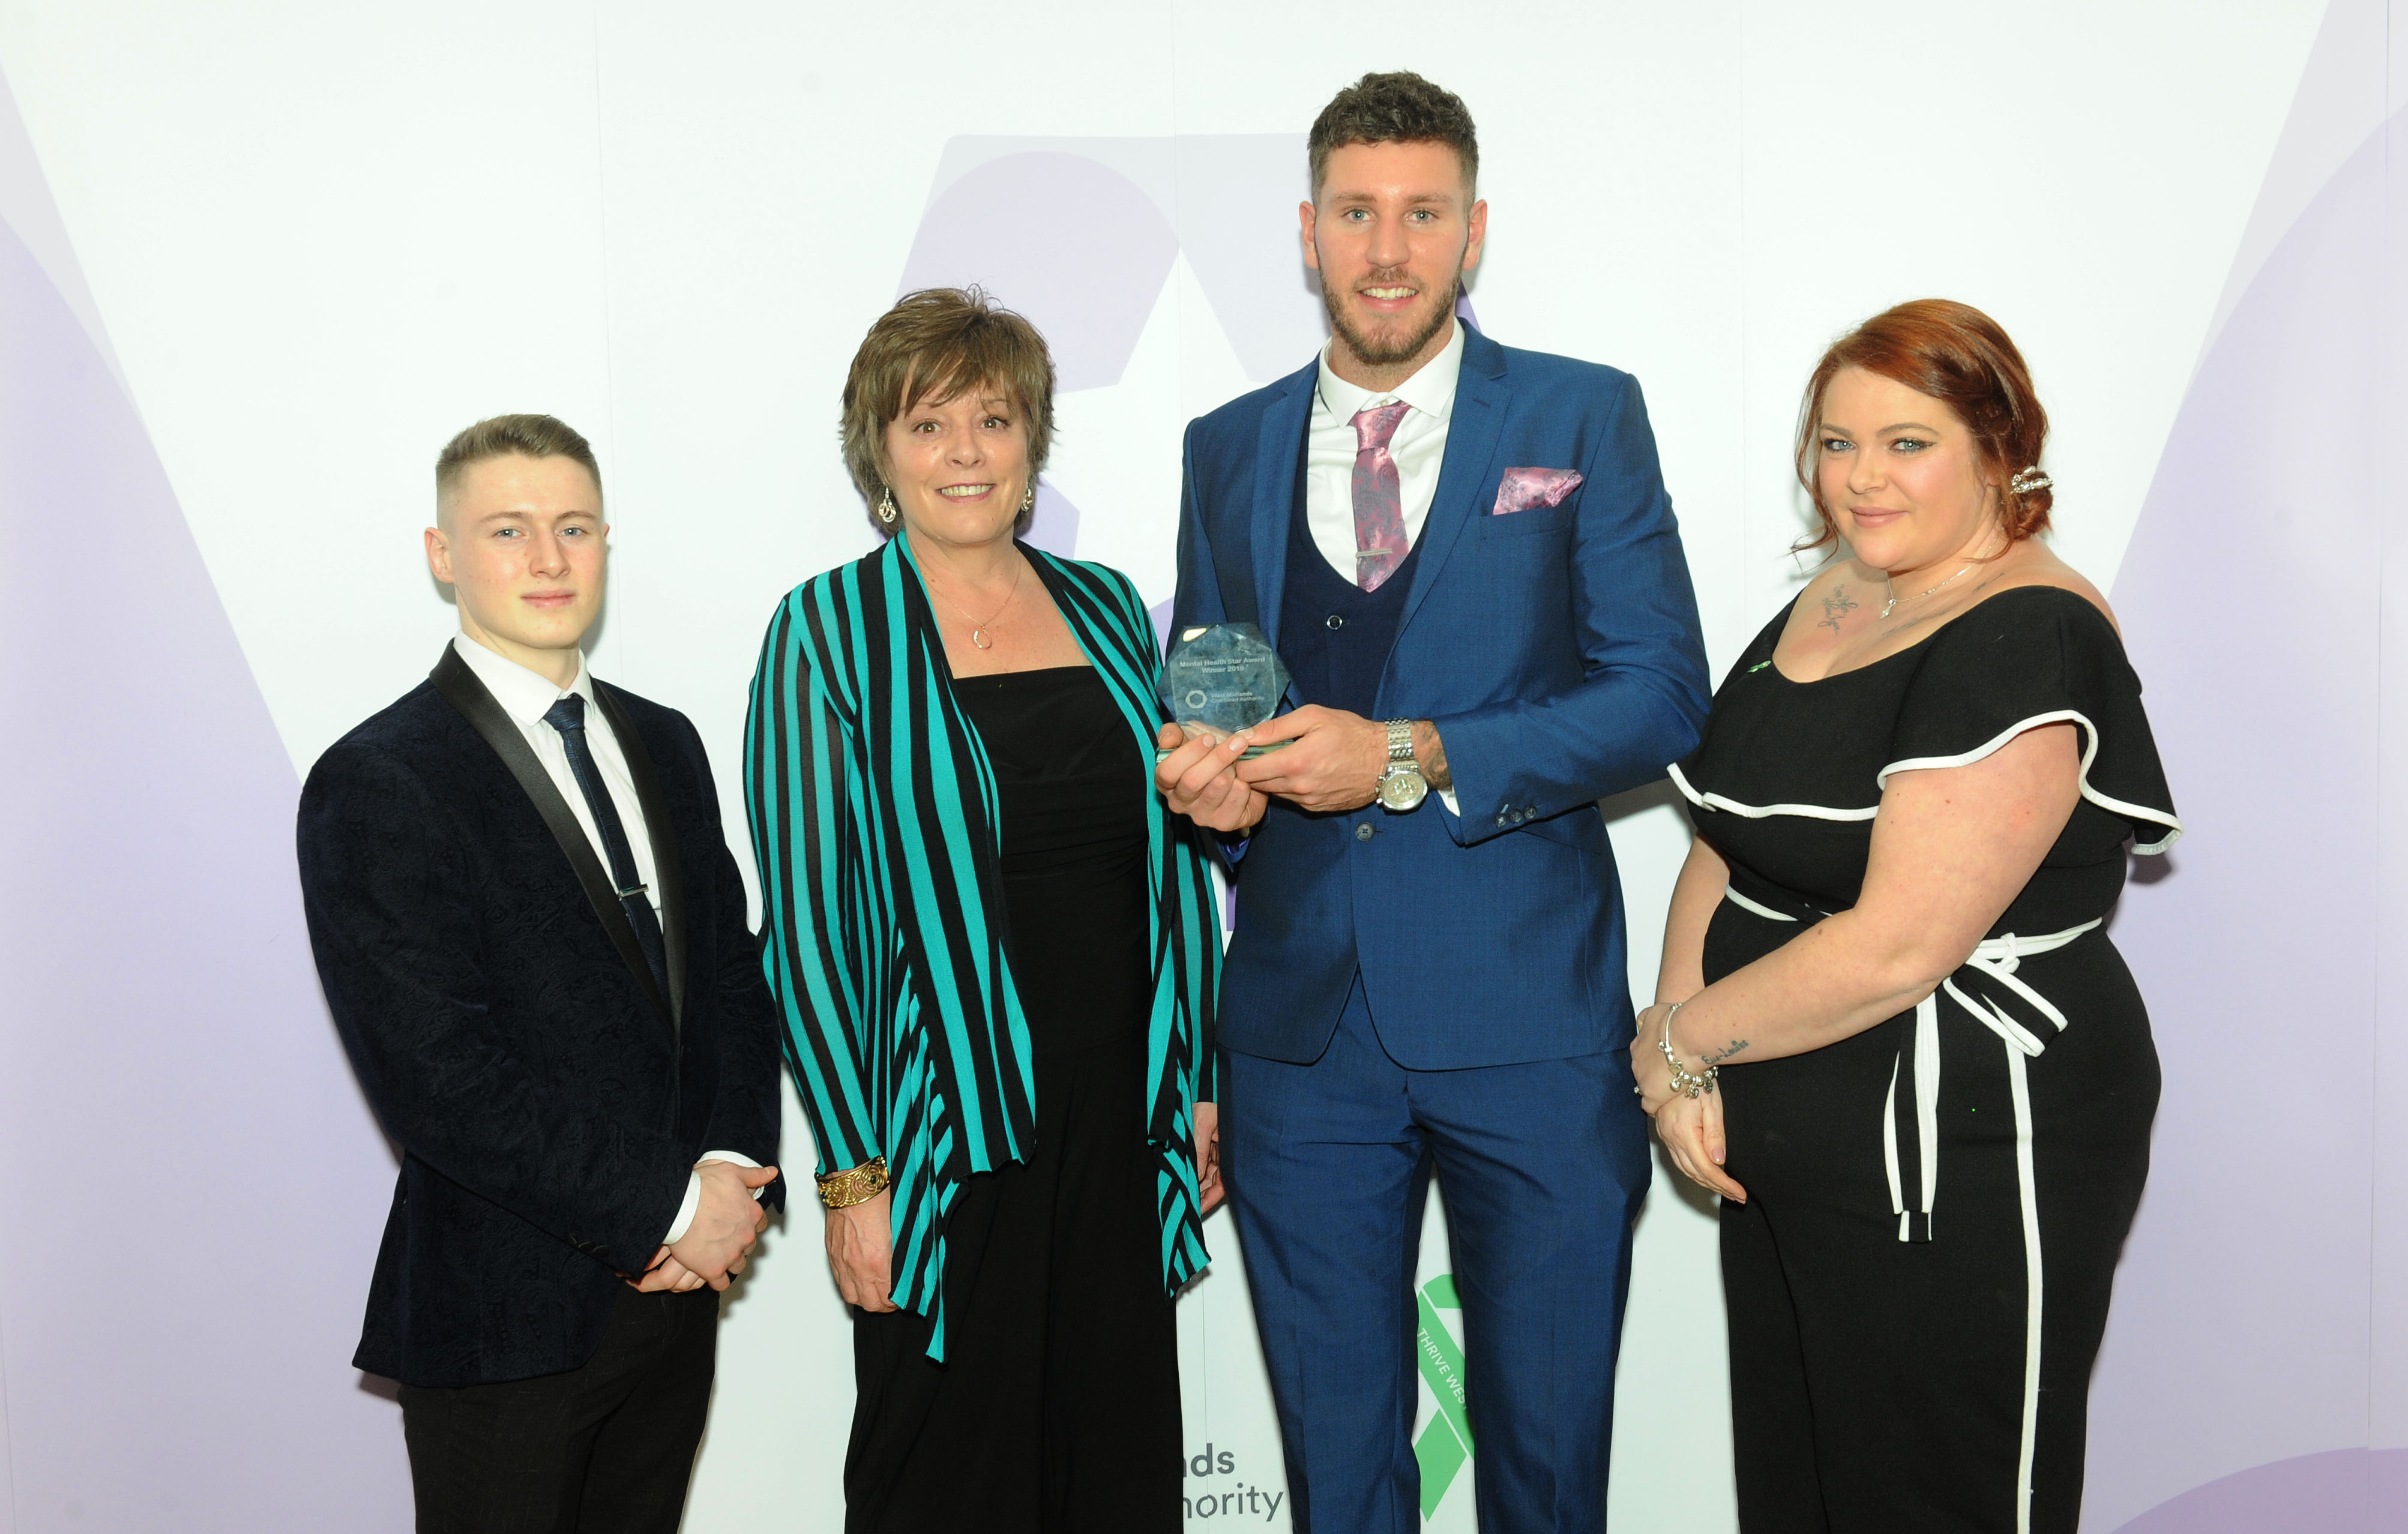 Joe Lockley and Bright Star Boxing Academy colleagues celebrate winning a Thrive Mental Health Award